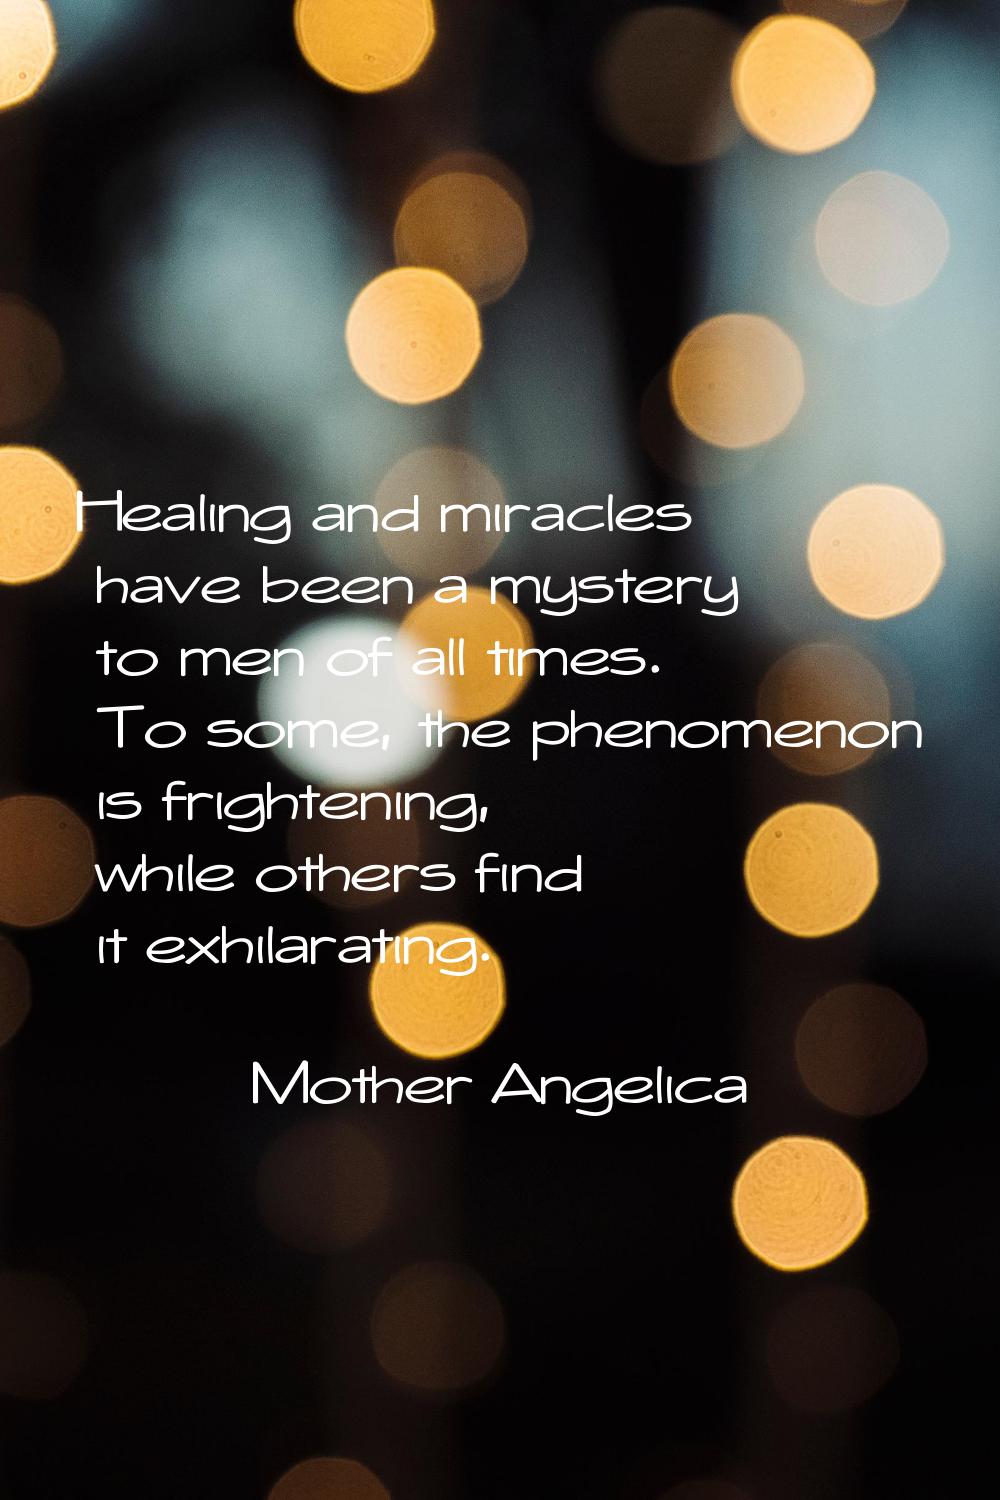 Healing and miracles have been a mystery to men of all times. To some, the phenomenon is frightenin